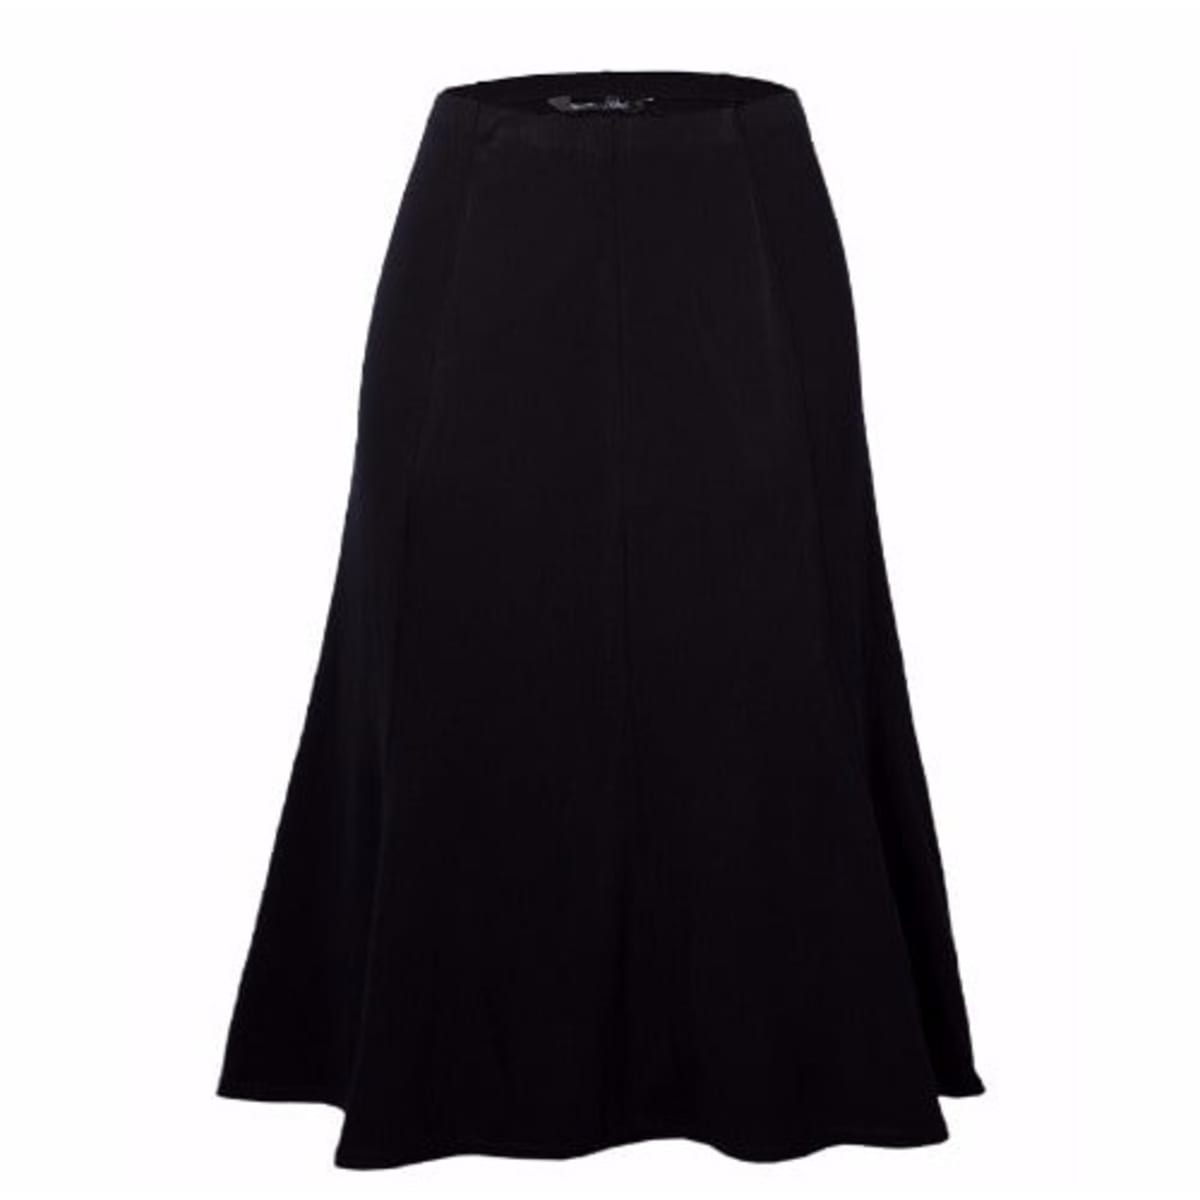 Alaia Ladies Black Patterned Flare Skirt, Brand Size 38 (US Size 6)